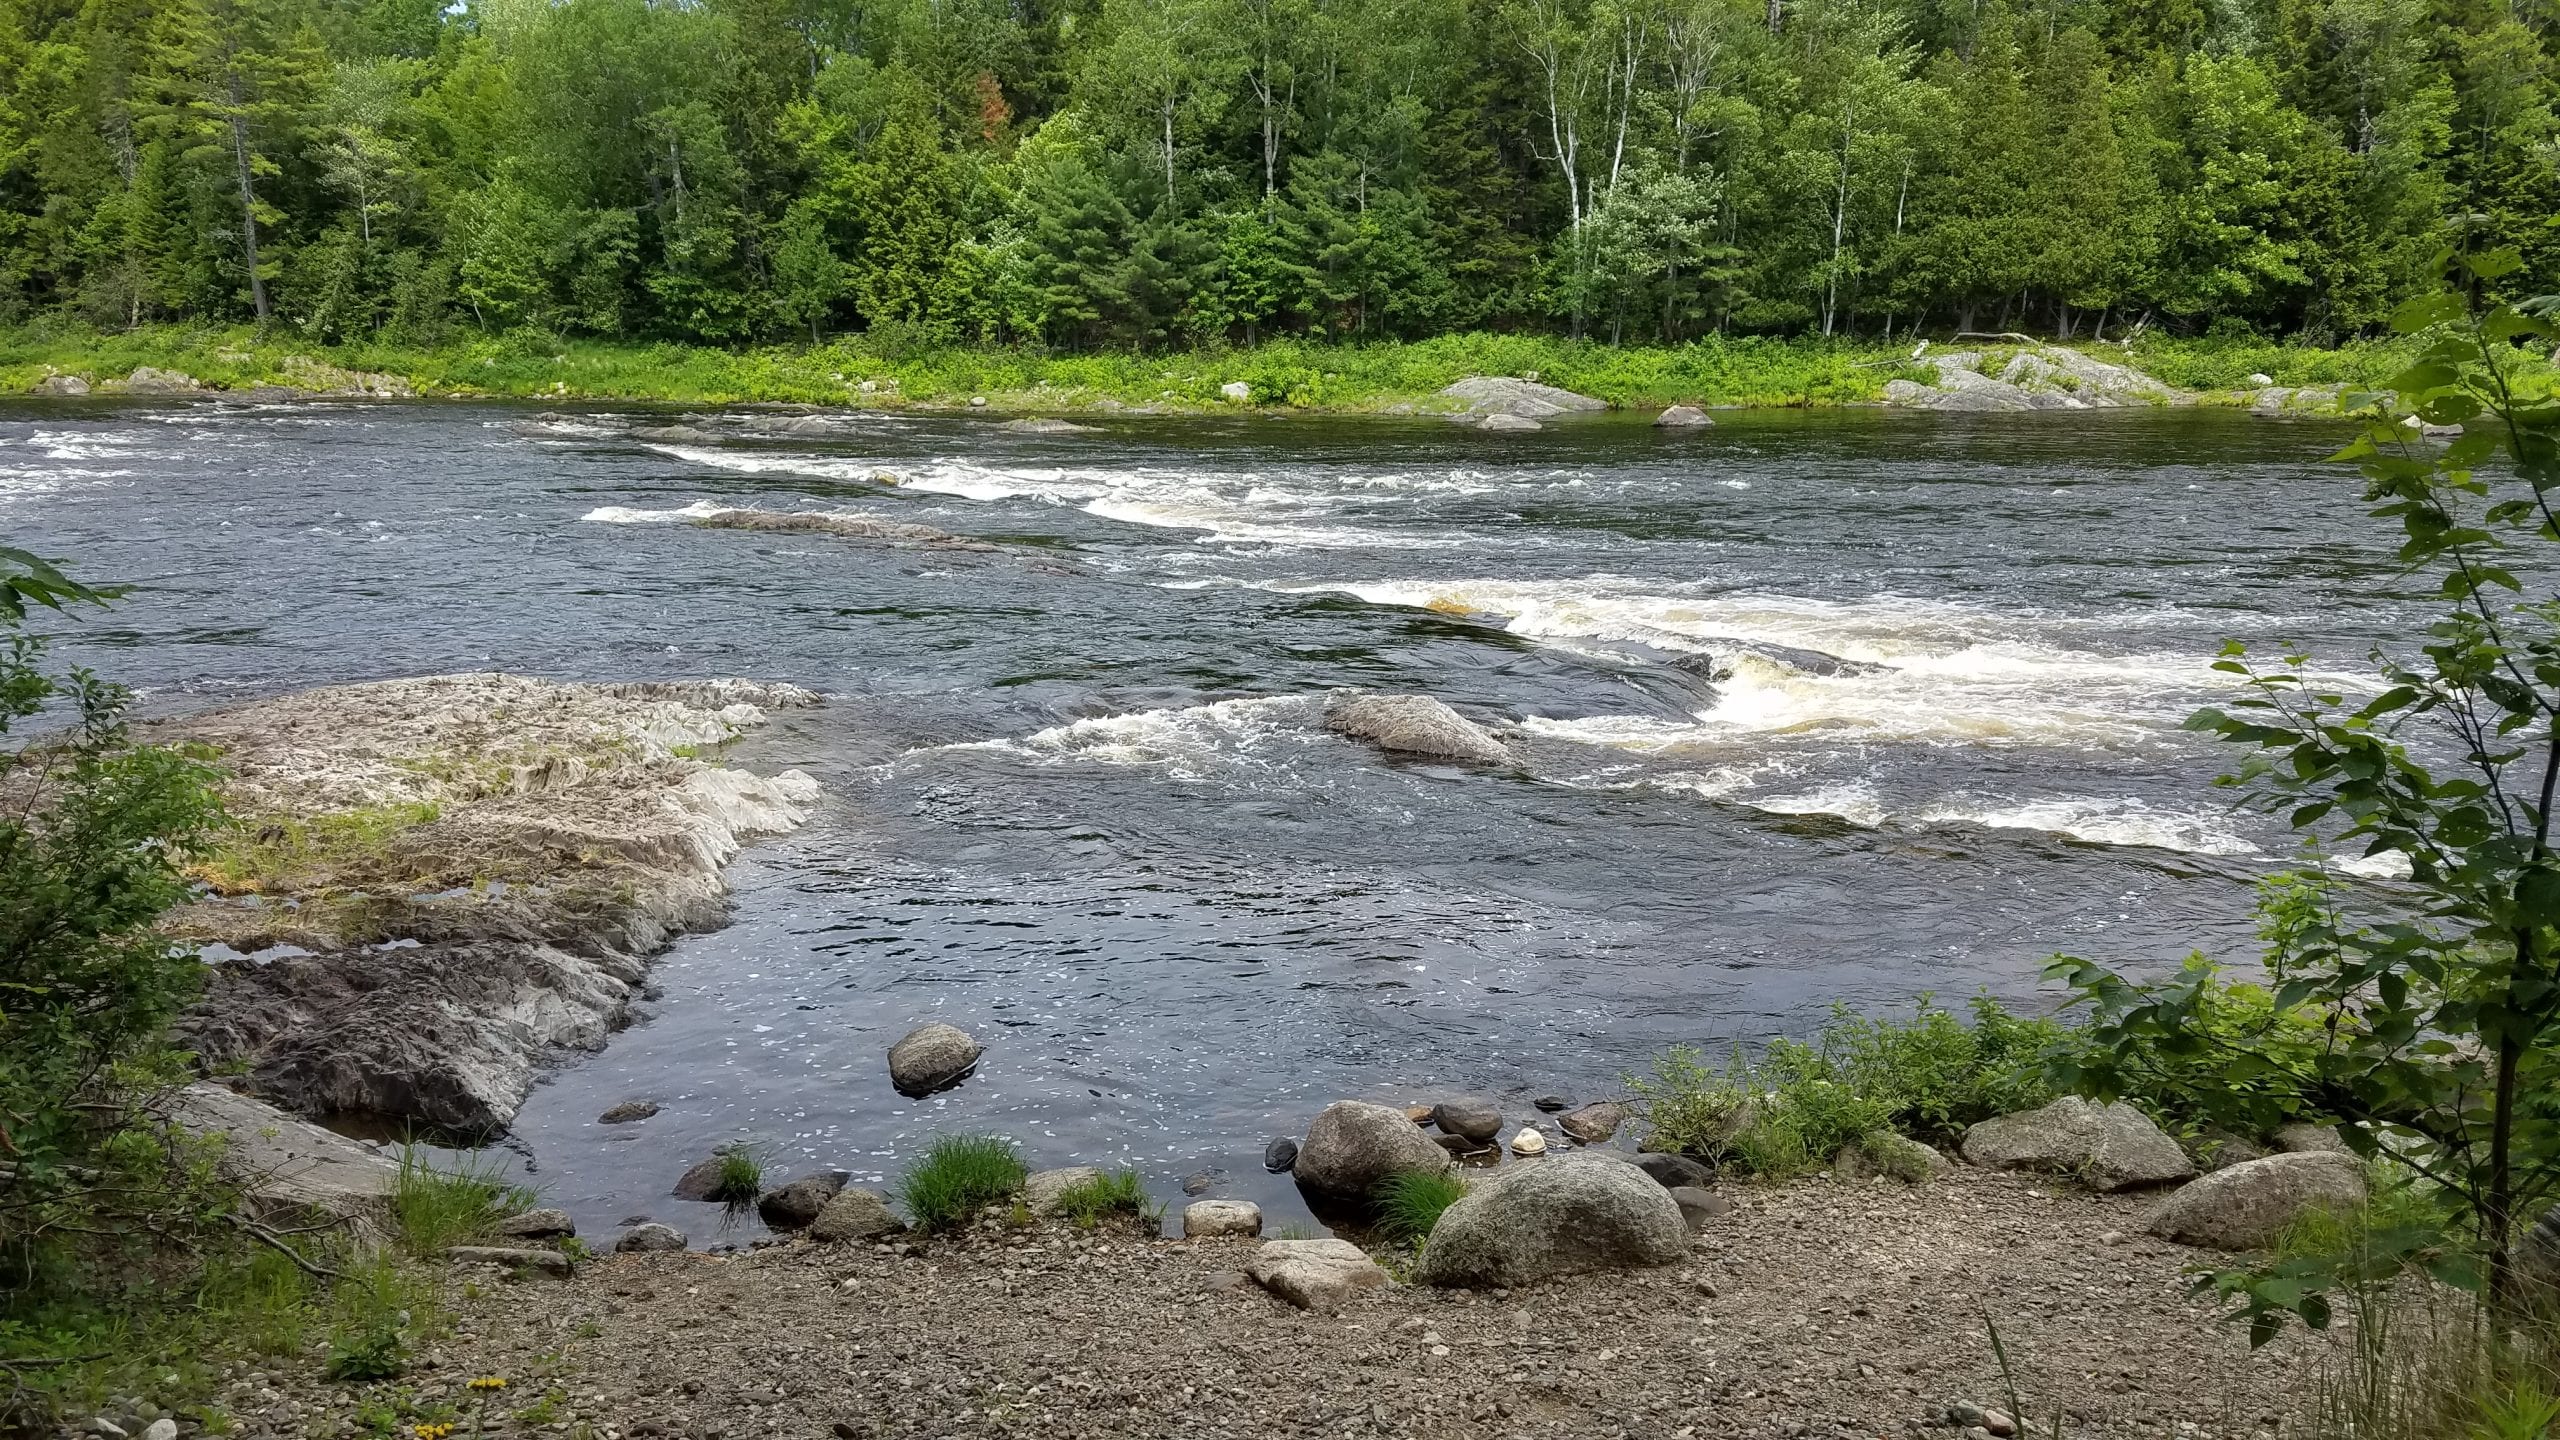 Ledge Falls, Medway – Easy to Reach Swimming and Fishing Spot